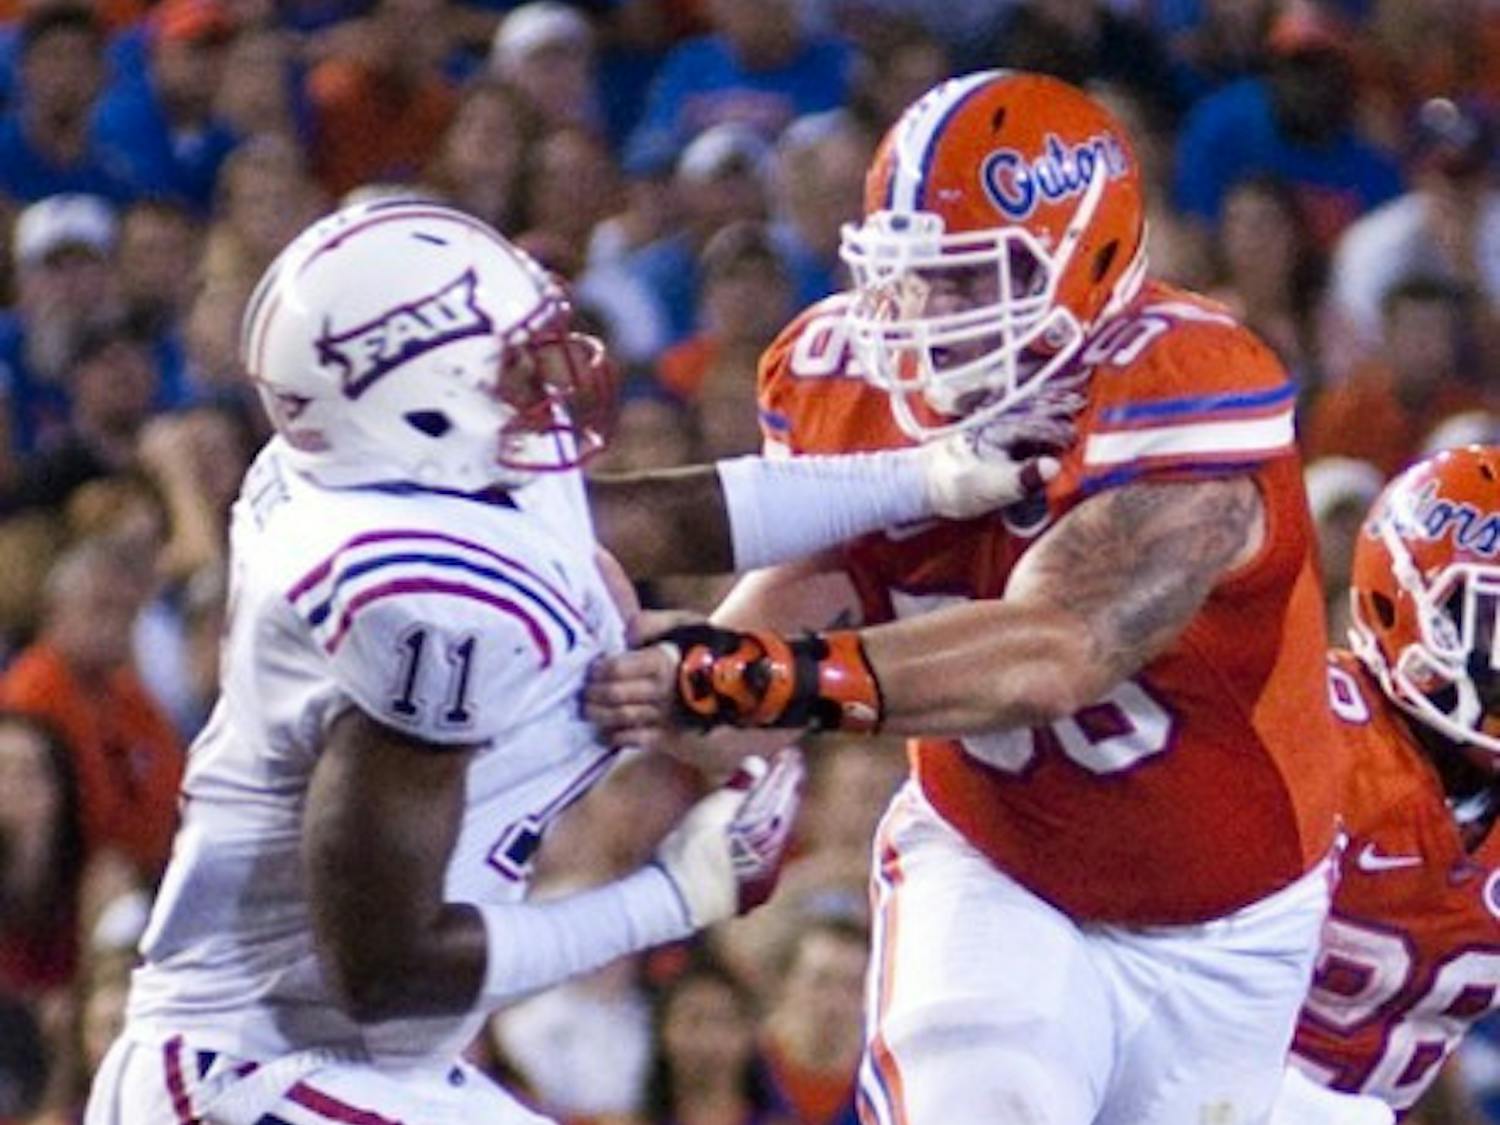 Florida left guard Dan Wenger, a sixth-year senior who transferred from Notre Dame, suffered two concussions while playing for the Irish.